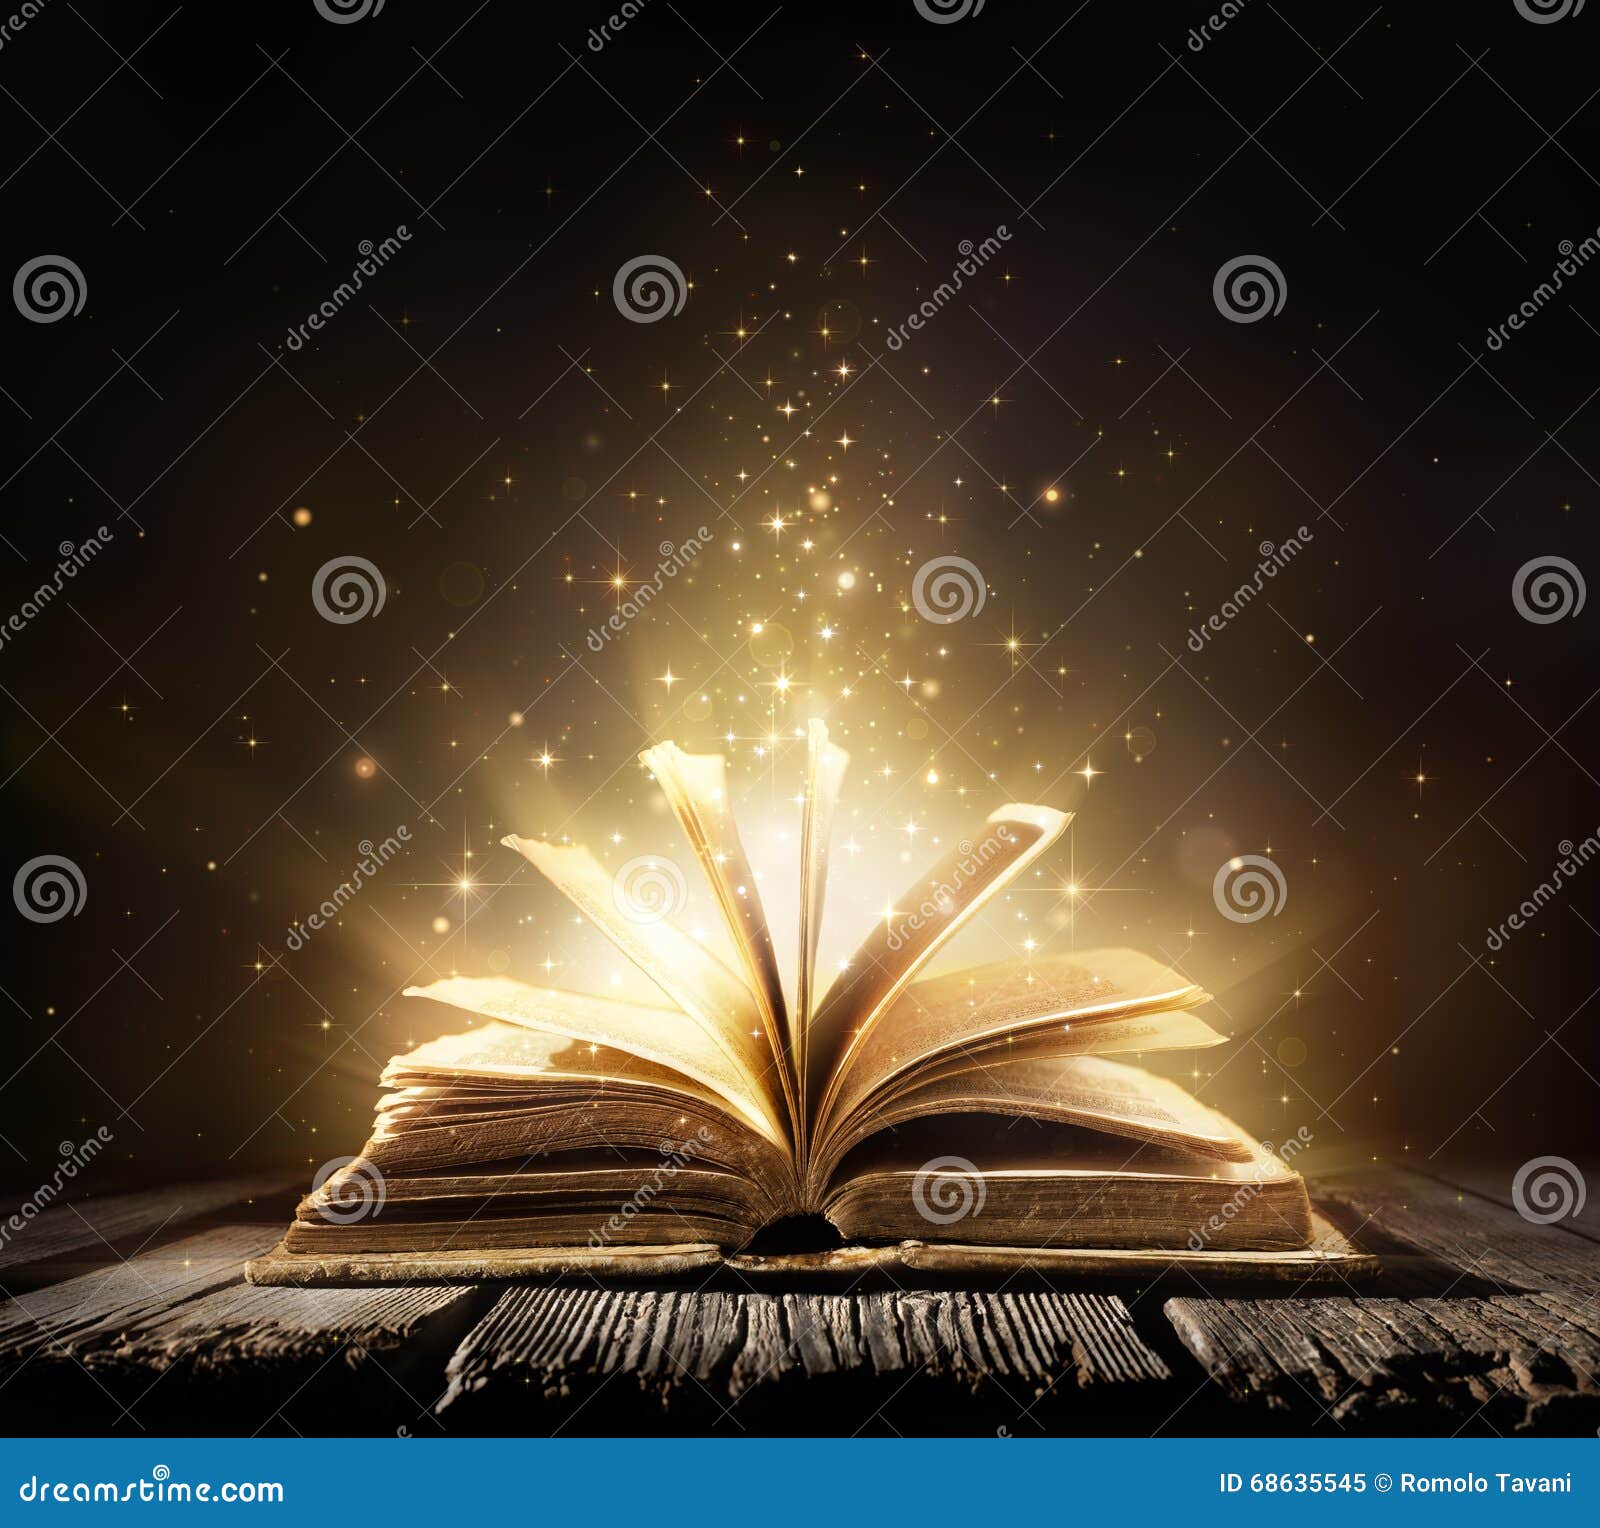 old book with magic lights